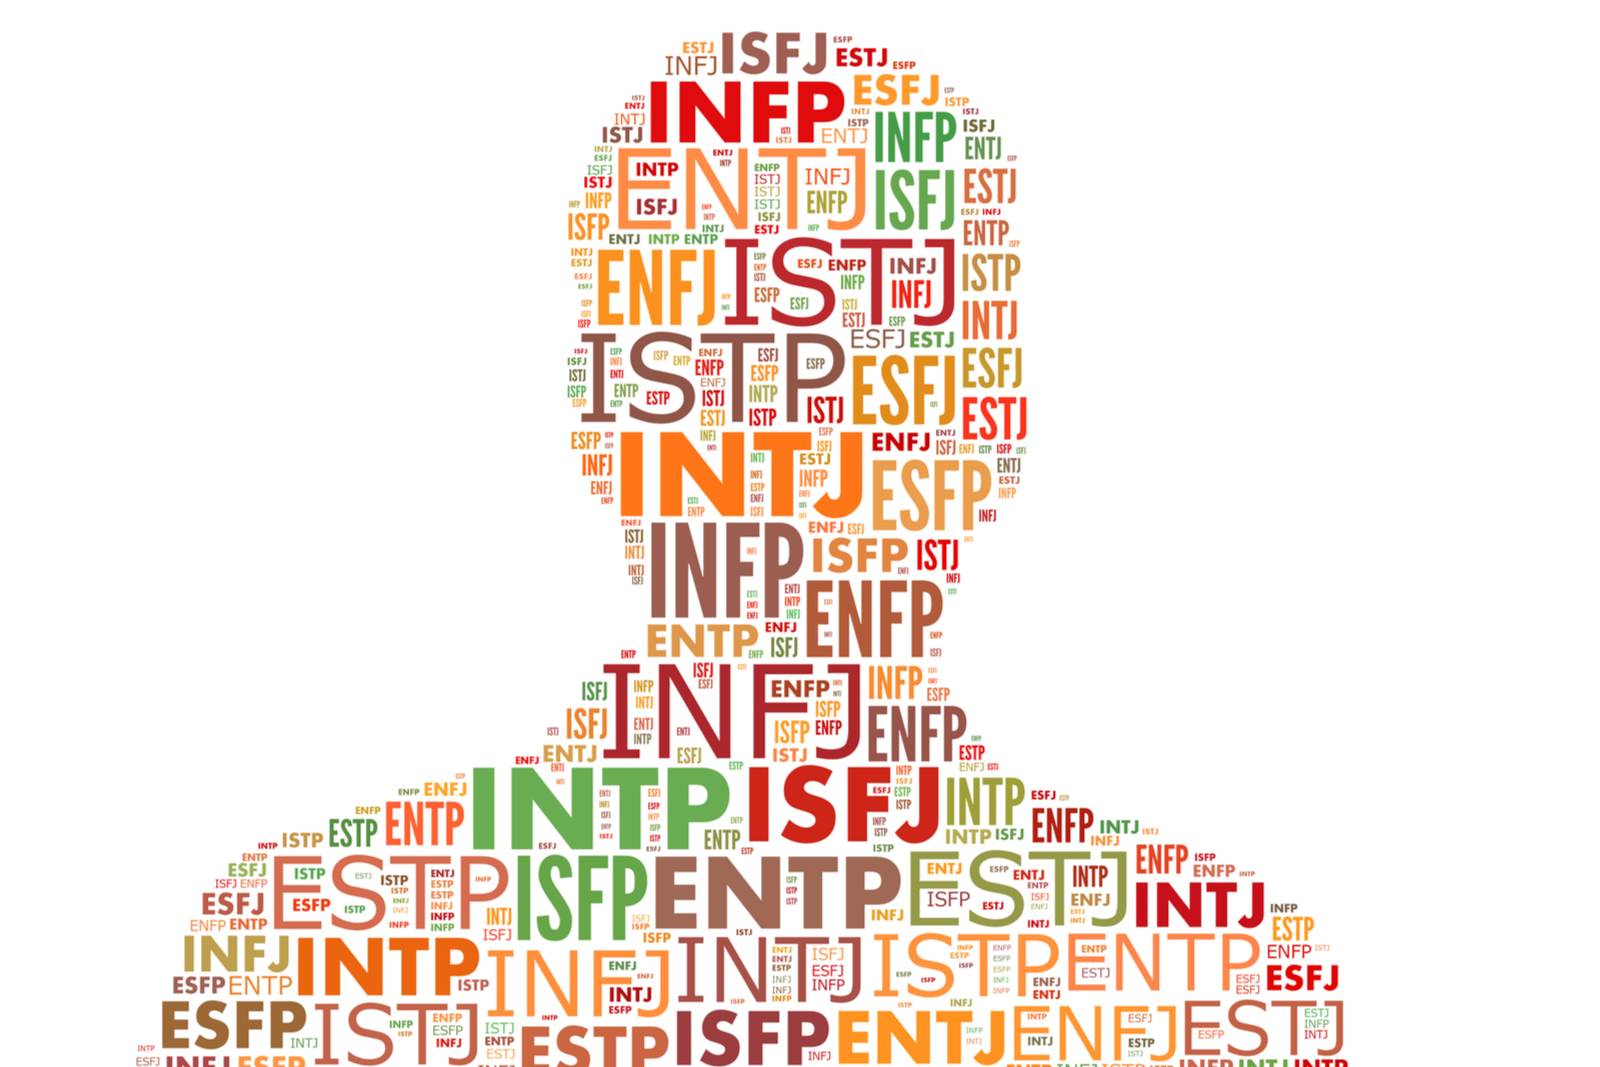 WHAT'S YOUR MYERS-BRIGGS PERSONALITY TYPE? - Dying Words